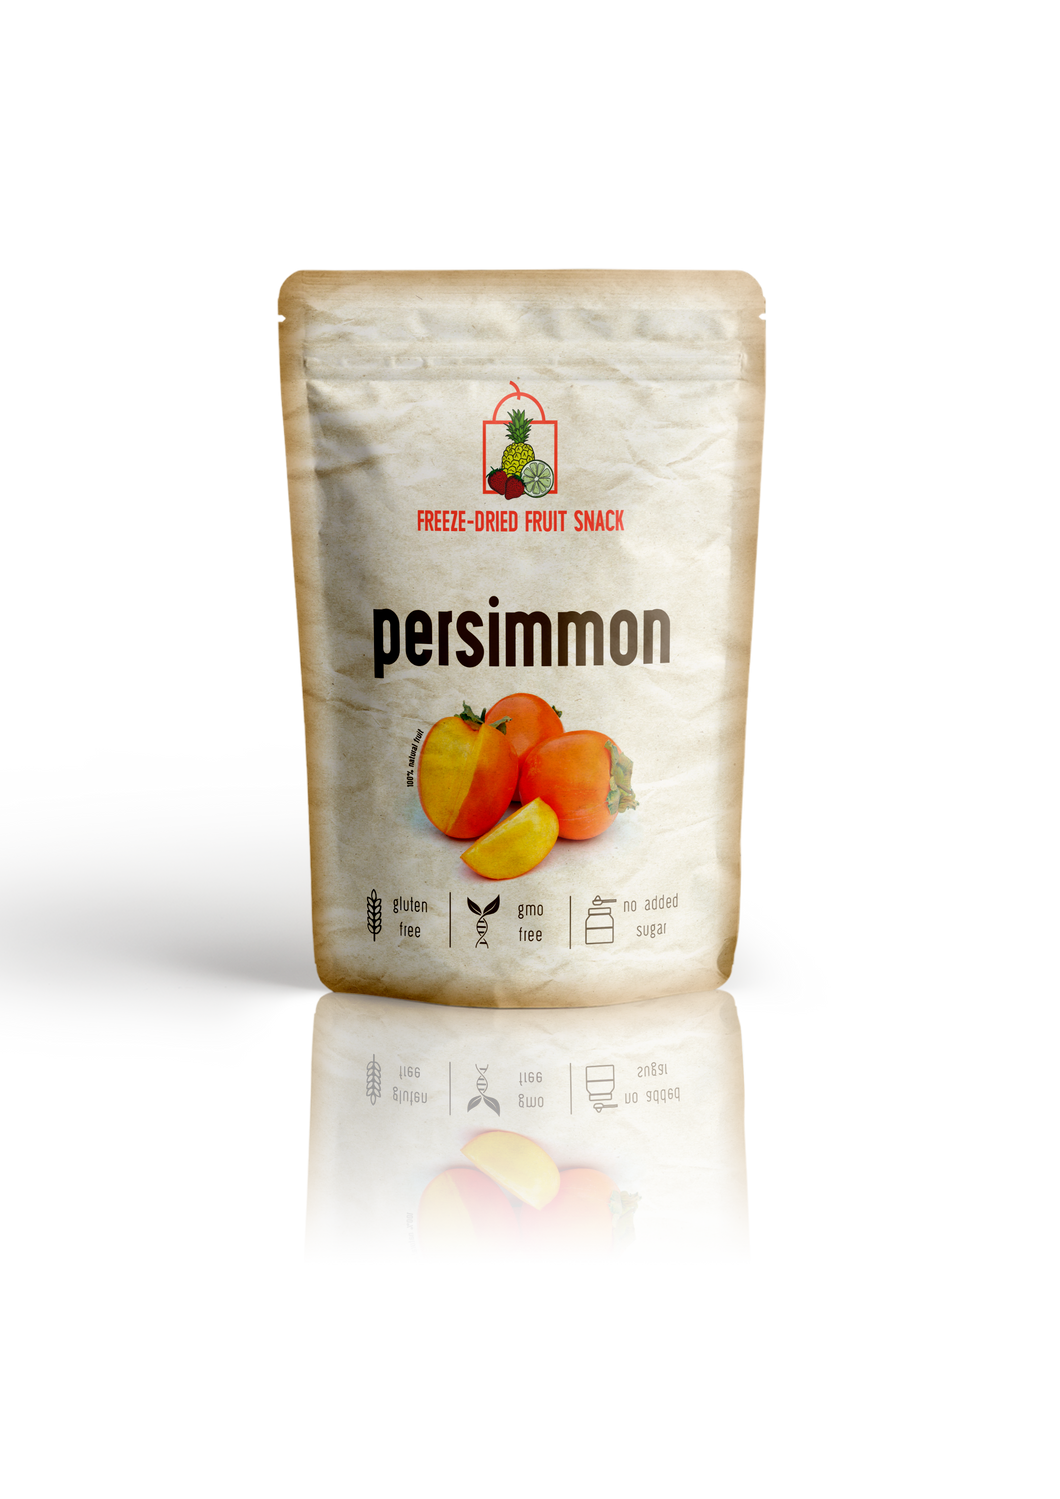 The Rotten Fruit Box Freeze Dried Persimmon Snack Pouch